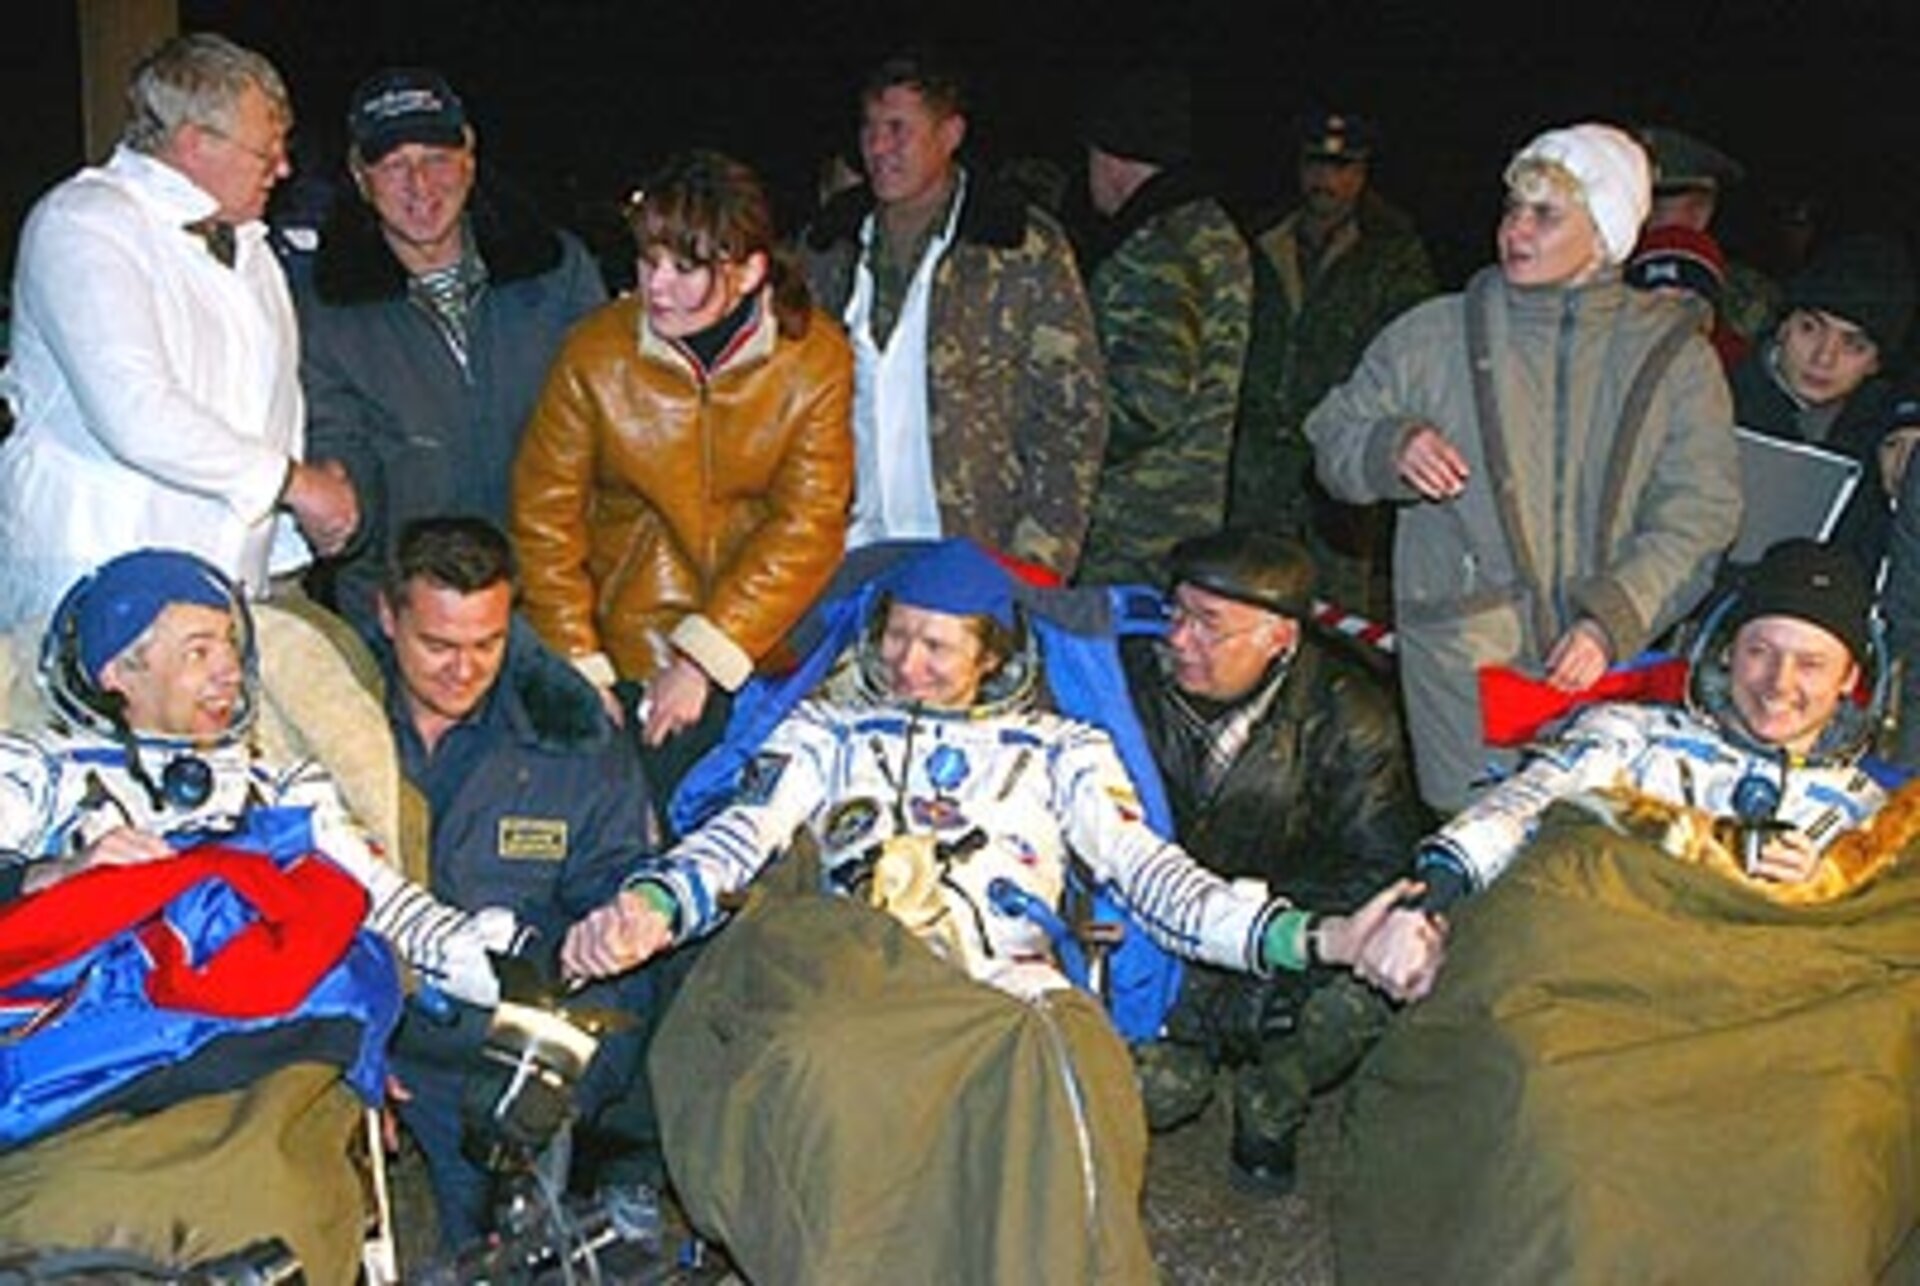 Padalka and Fincke returned to earth after a six-month stay on the Station